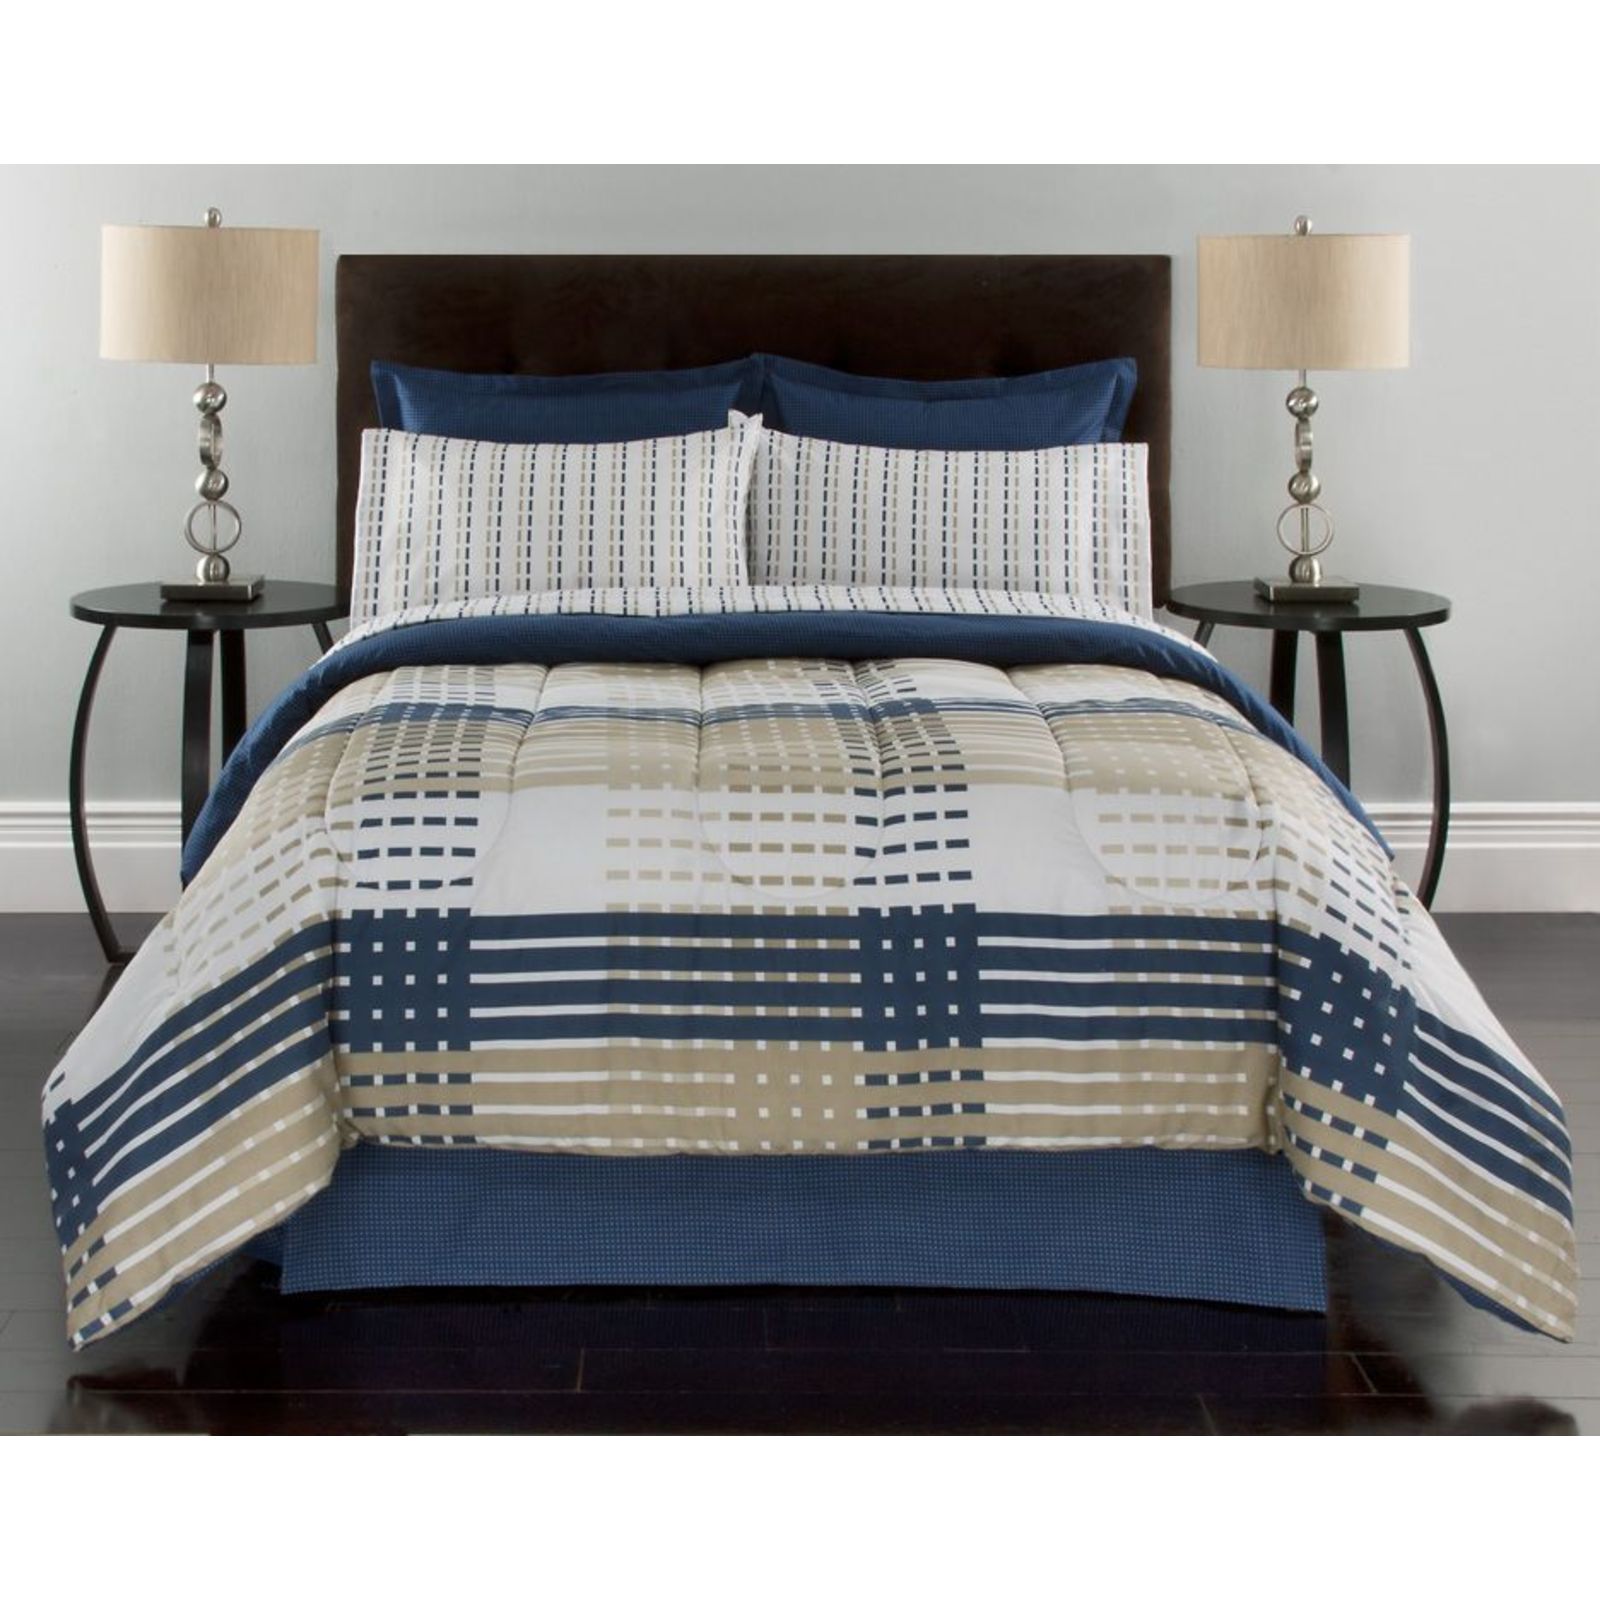 Colormate Complete Bed Set - Cameron